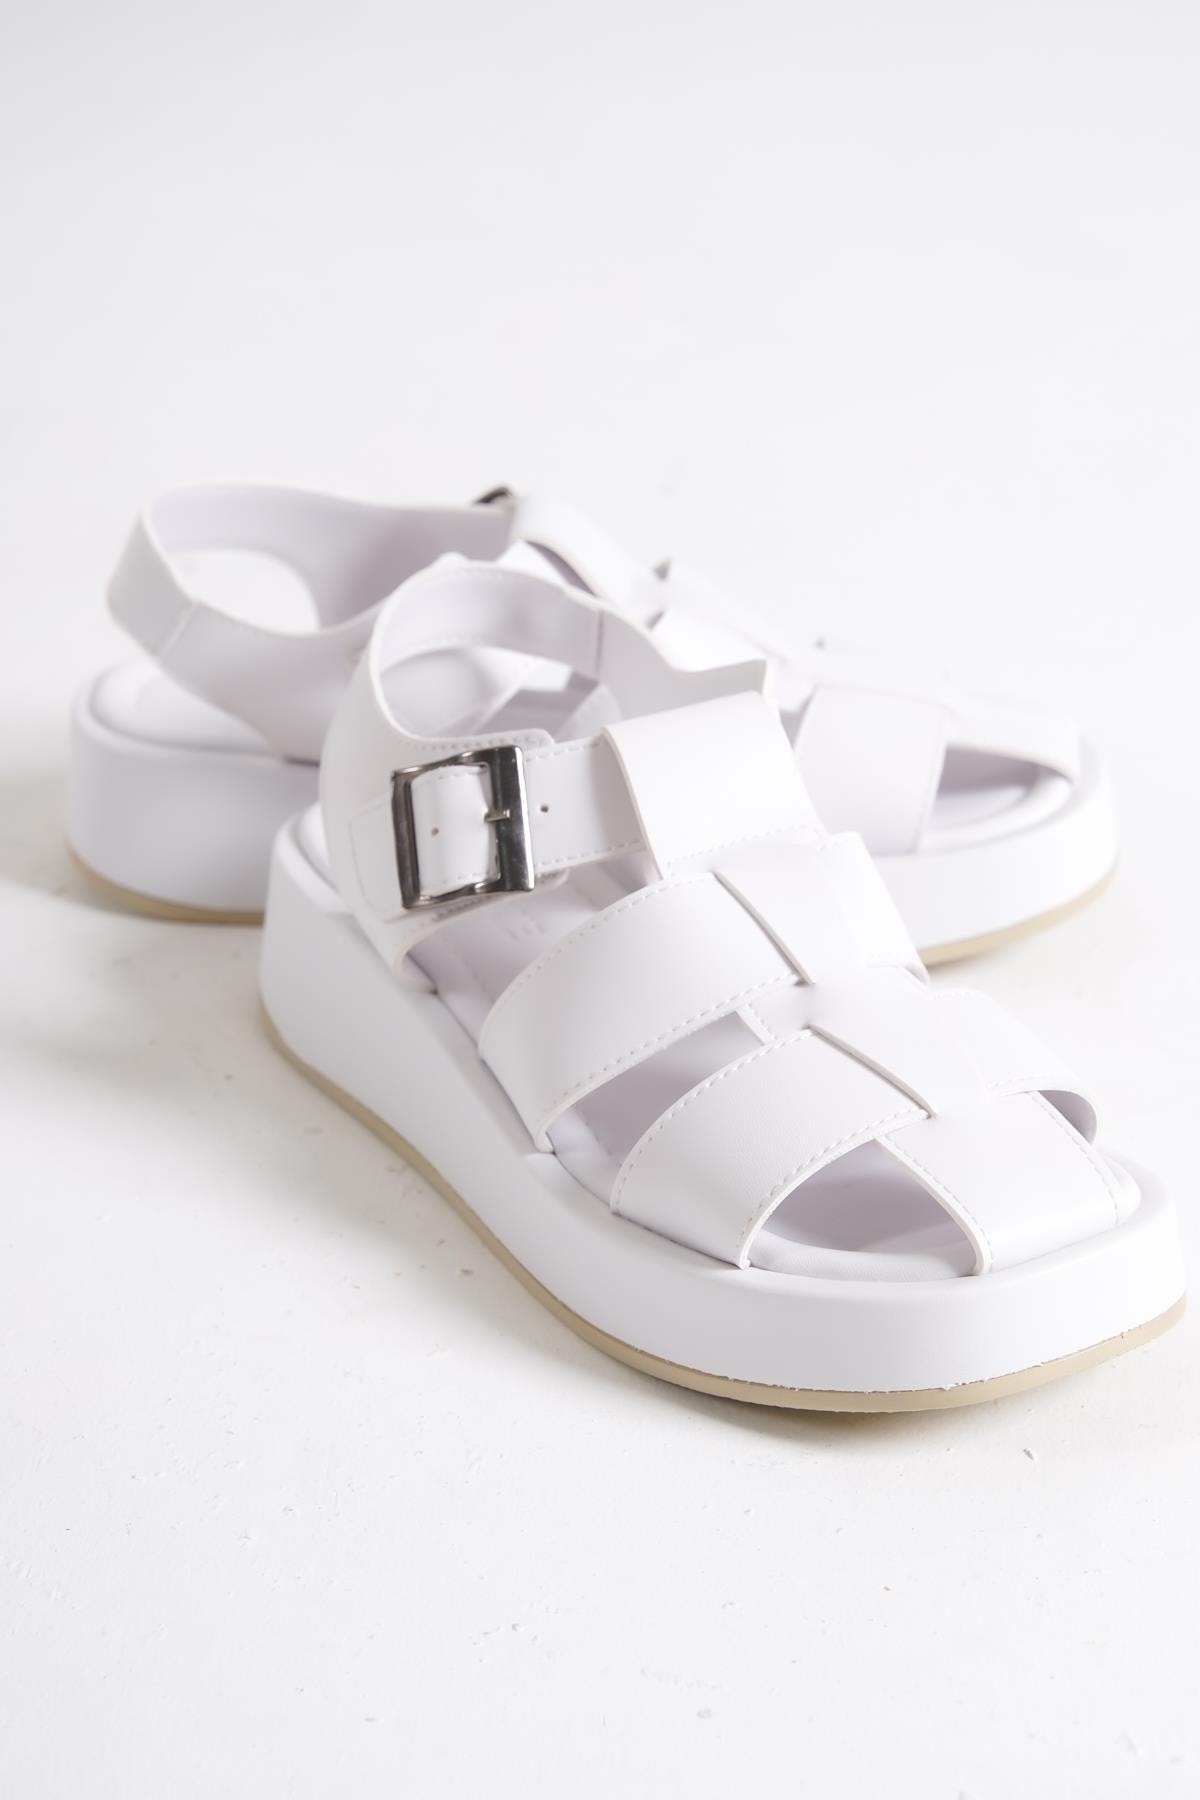 Levně Capone Outfitters Capone Women's Gladiator Band Wedge Heels, White Women's Flatform Sandals